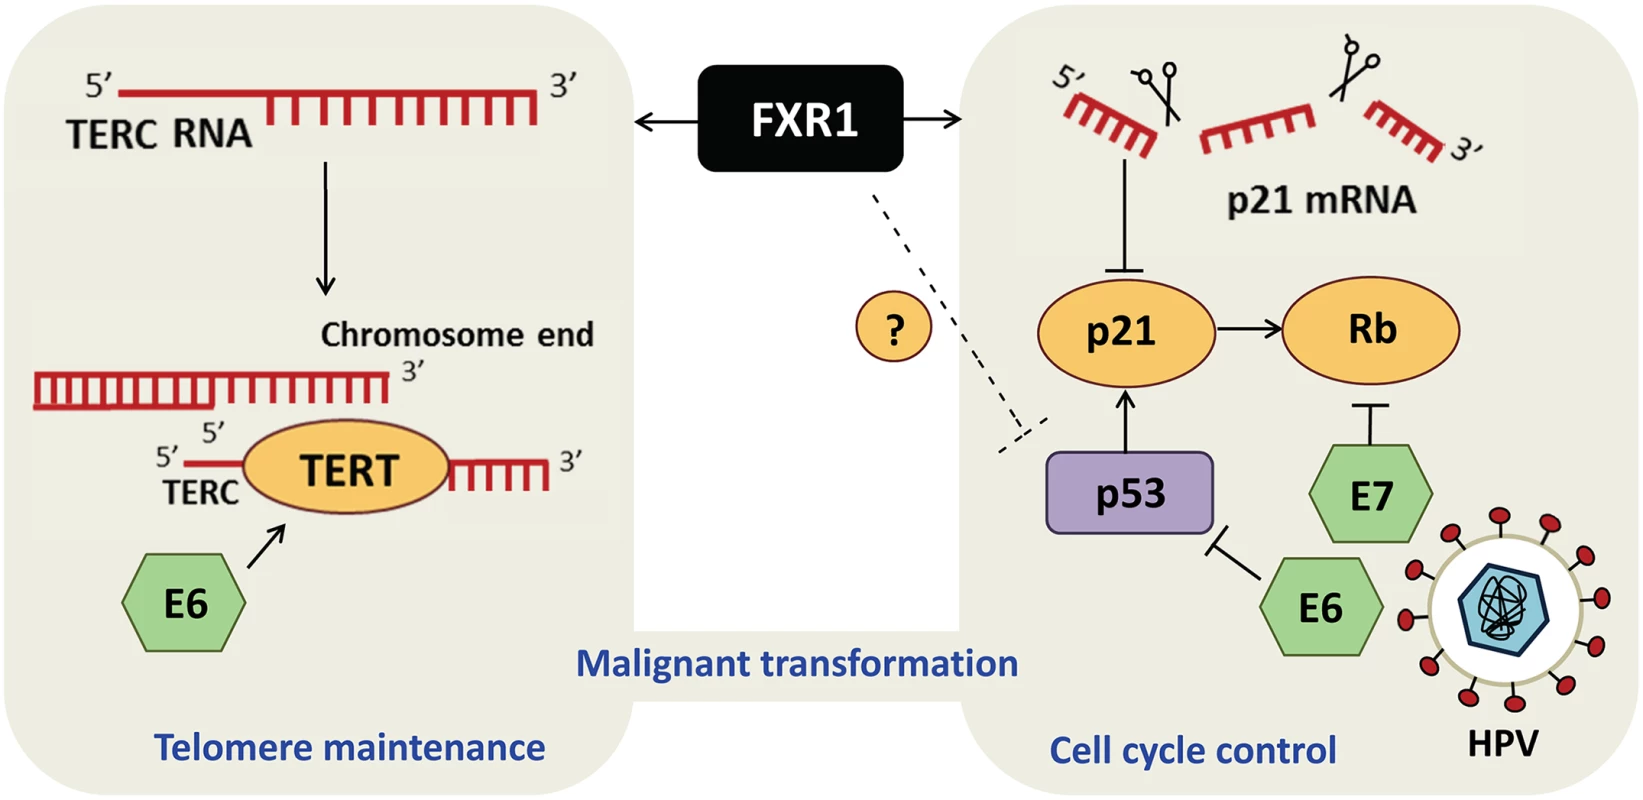 FXR1 engages dual mechanisms to promote malignant transformation in HNSCC.